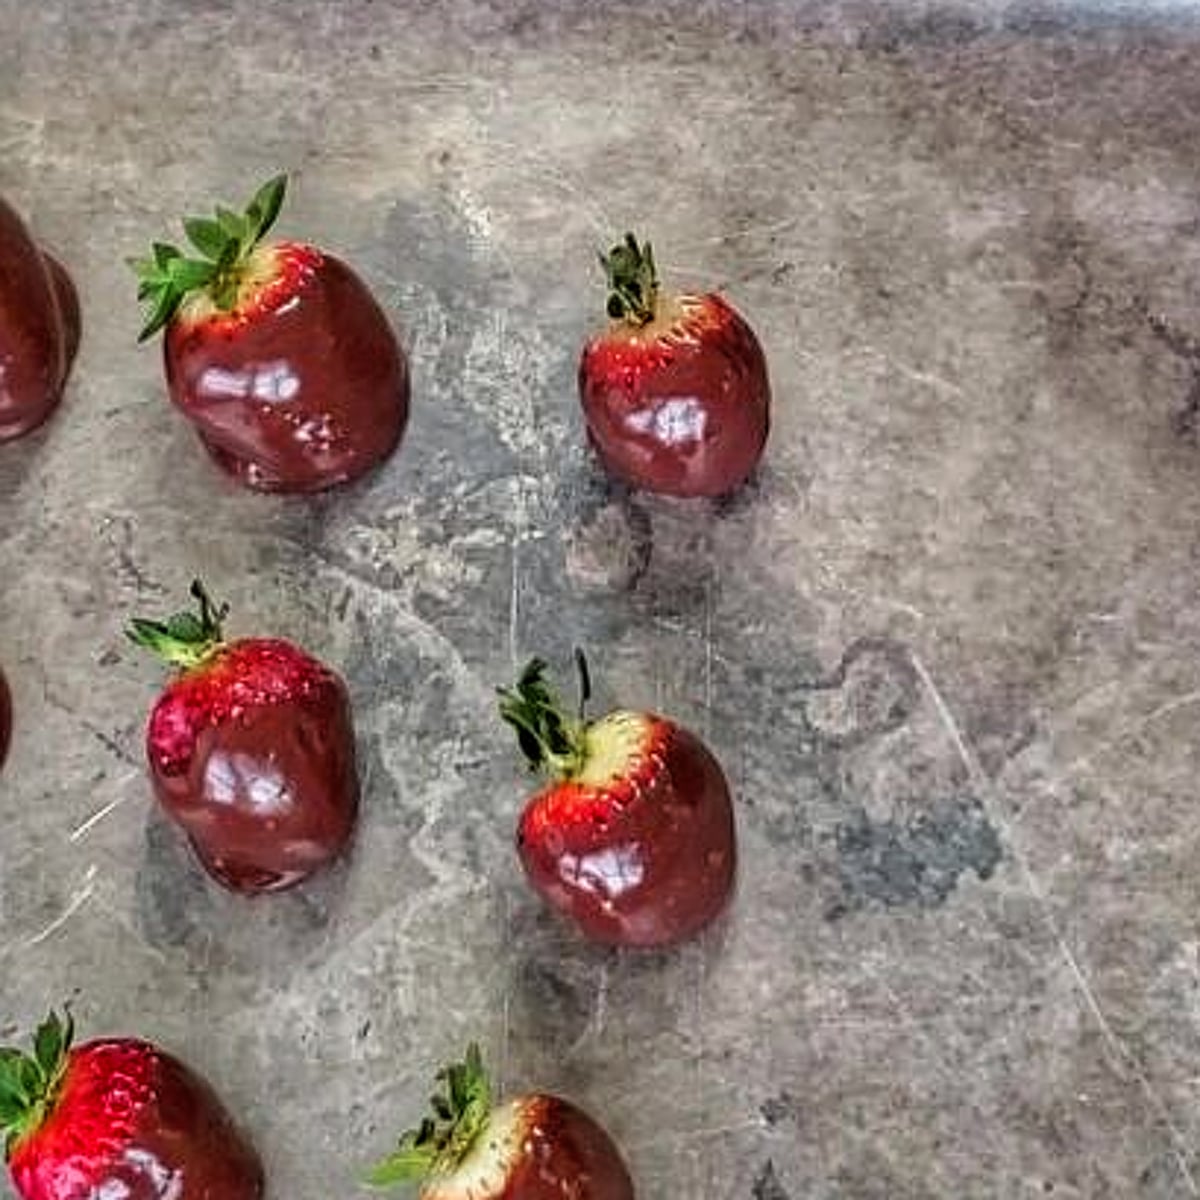 dipped strawberries on waxed paper-lined baking sheet.